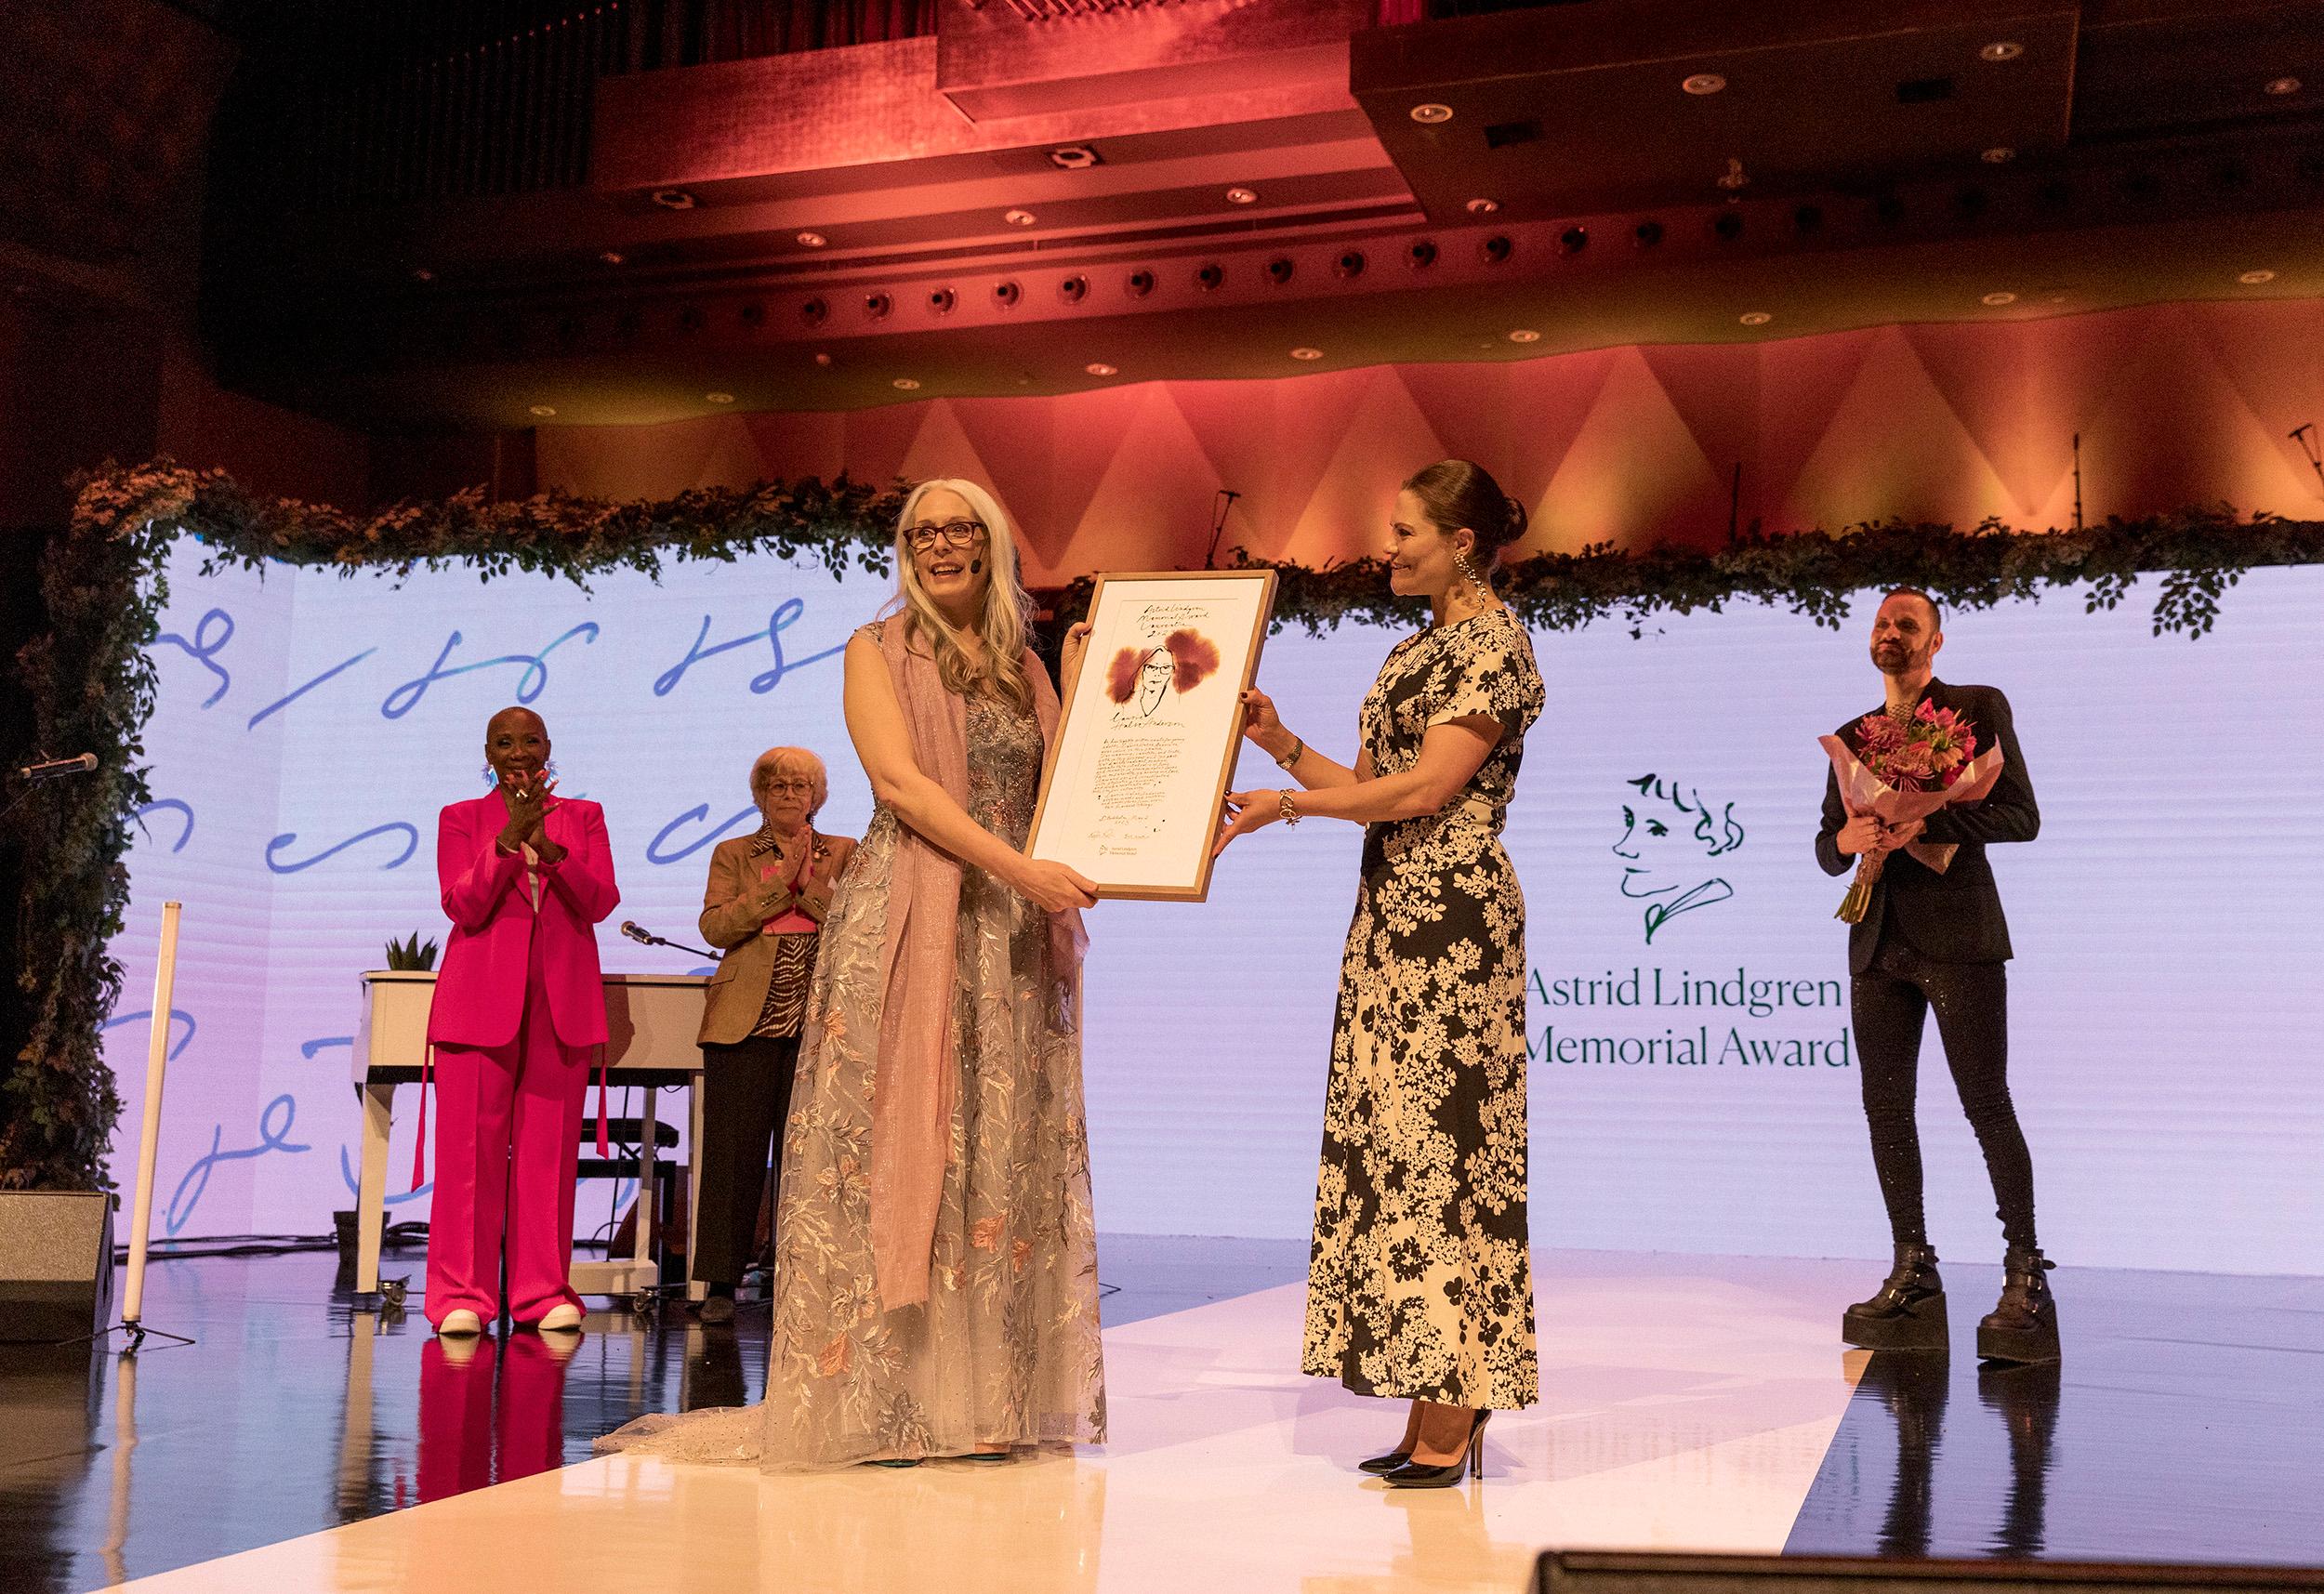 The crown princess Victoria giving the award to Laurie Halse Anderson.